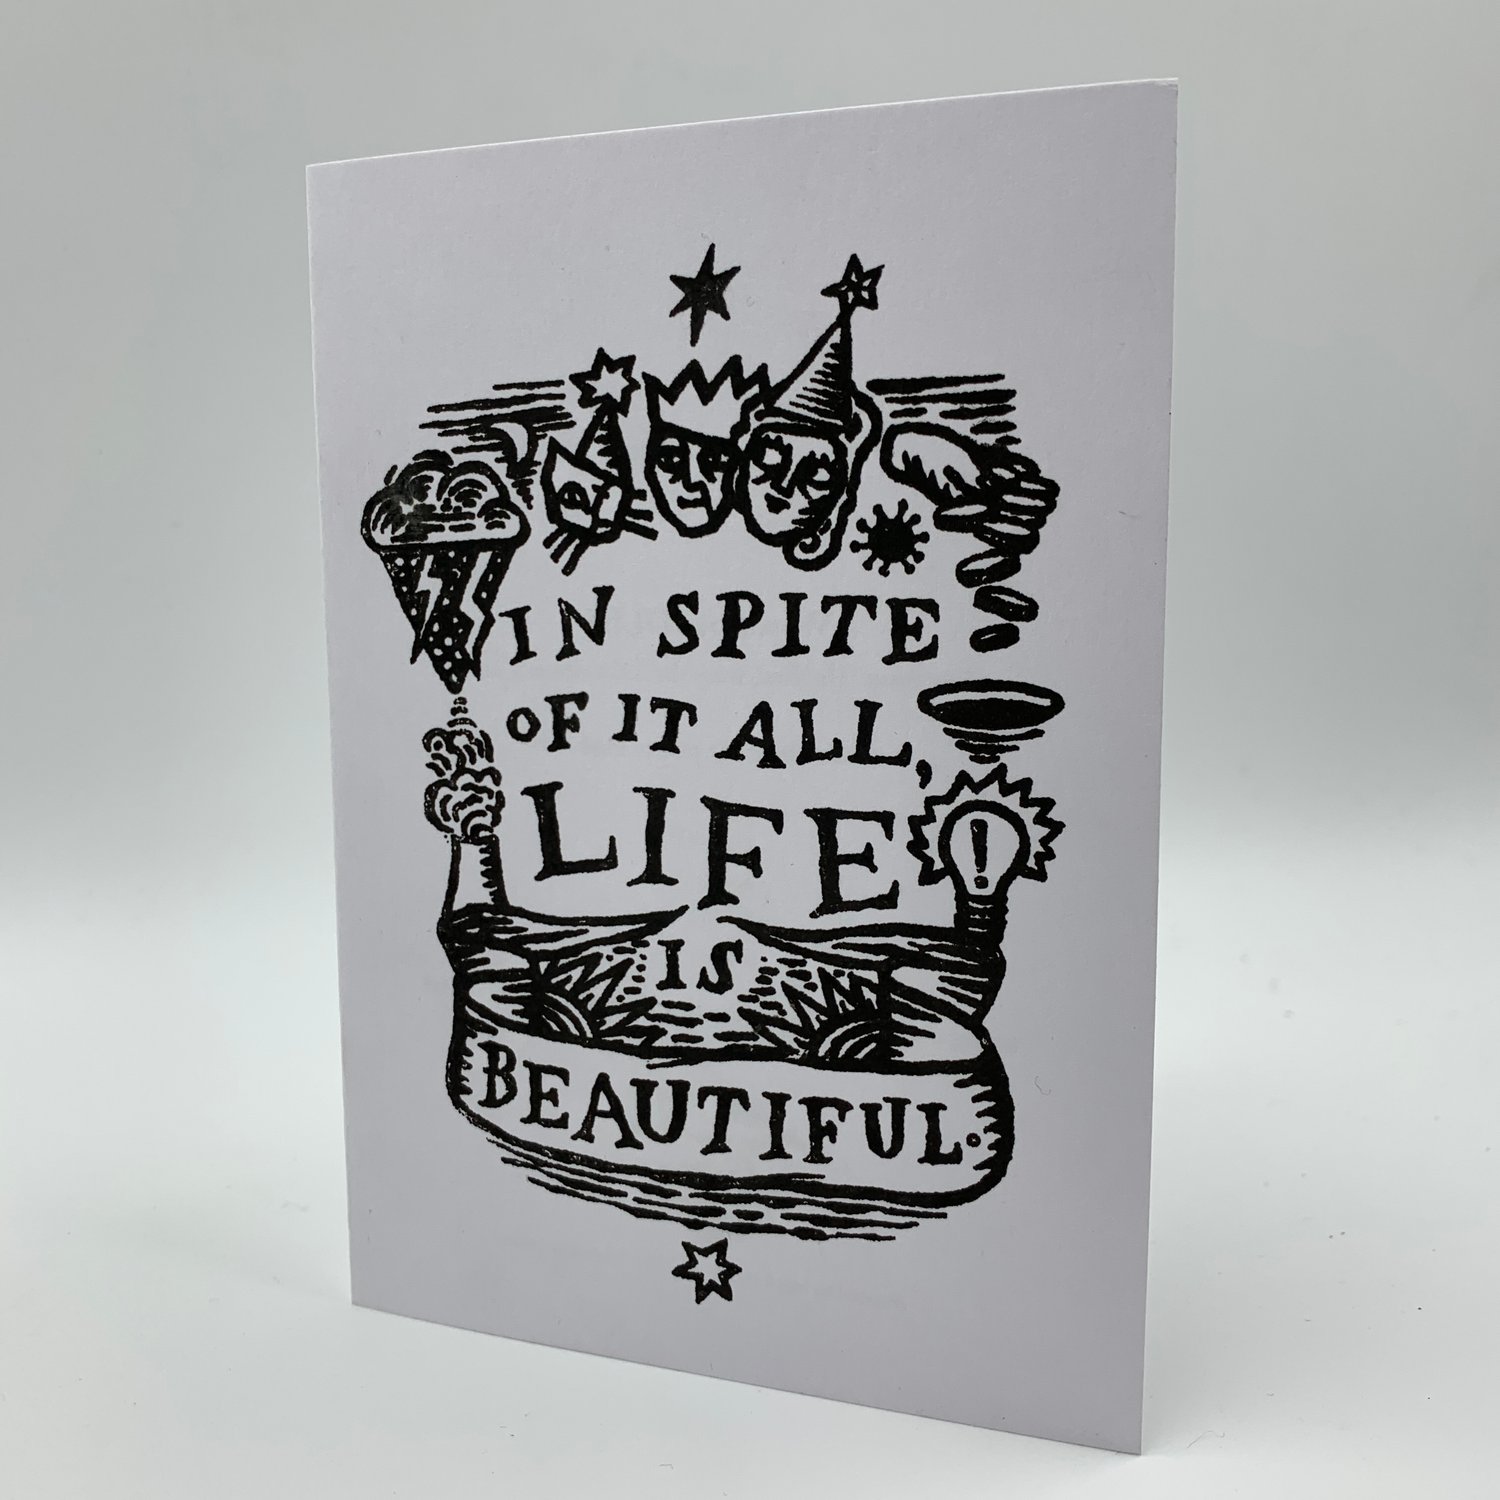 Hand-printed 'In Spite Of It All' limited edition cards